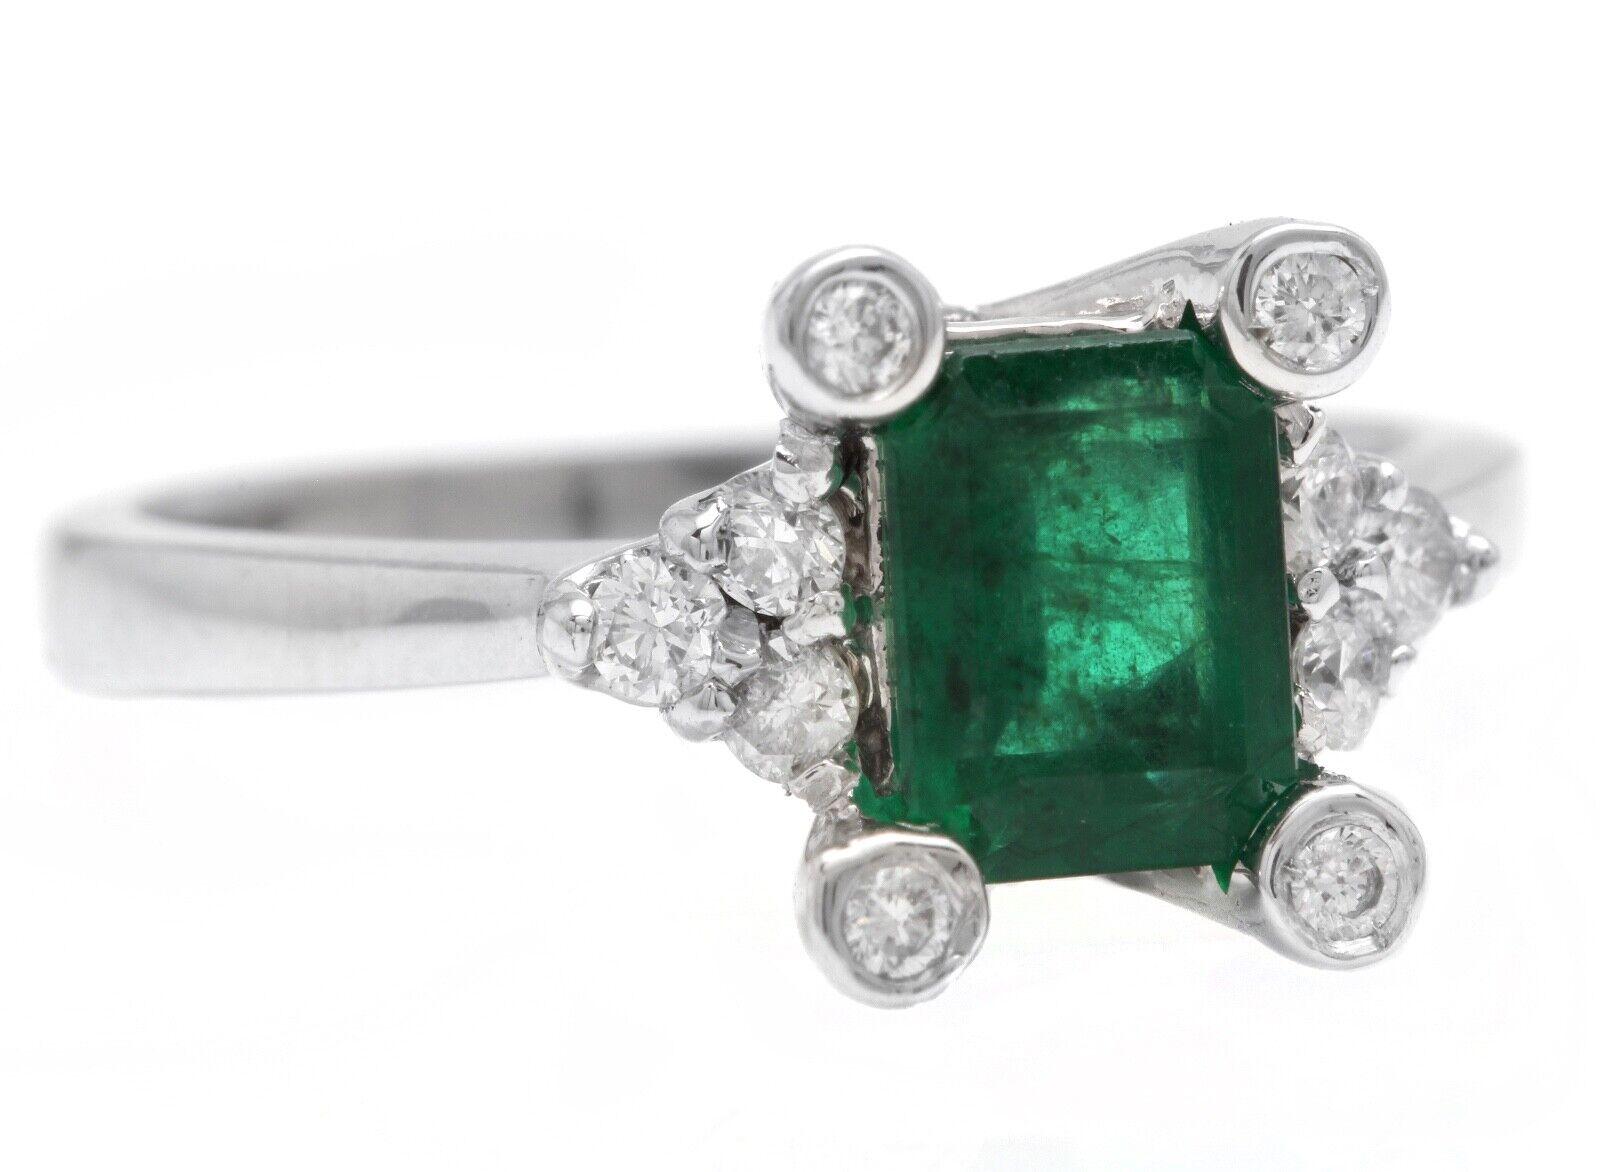 1.22 Carats Natural Emerald and Diamond 14K Solid White Gold Ring

Suggested Replacement Value: $2,500.00

Total Natural Green Emerald Weight is: Approx. 1.00 Carats 

Emerald Measures: Approx. 6.70 x 5.07mm

Natural Round Diamonds Weight: Approx.